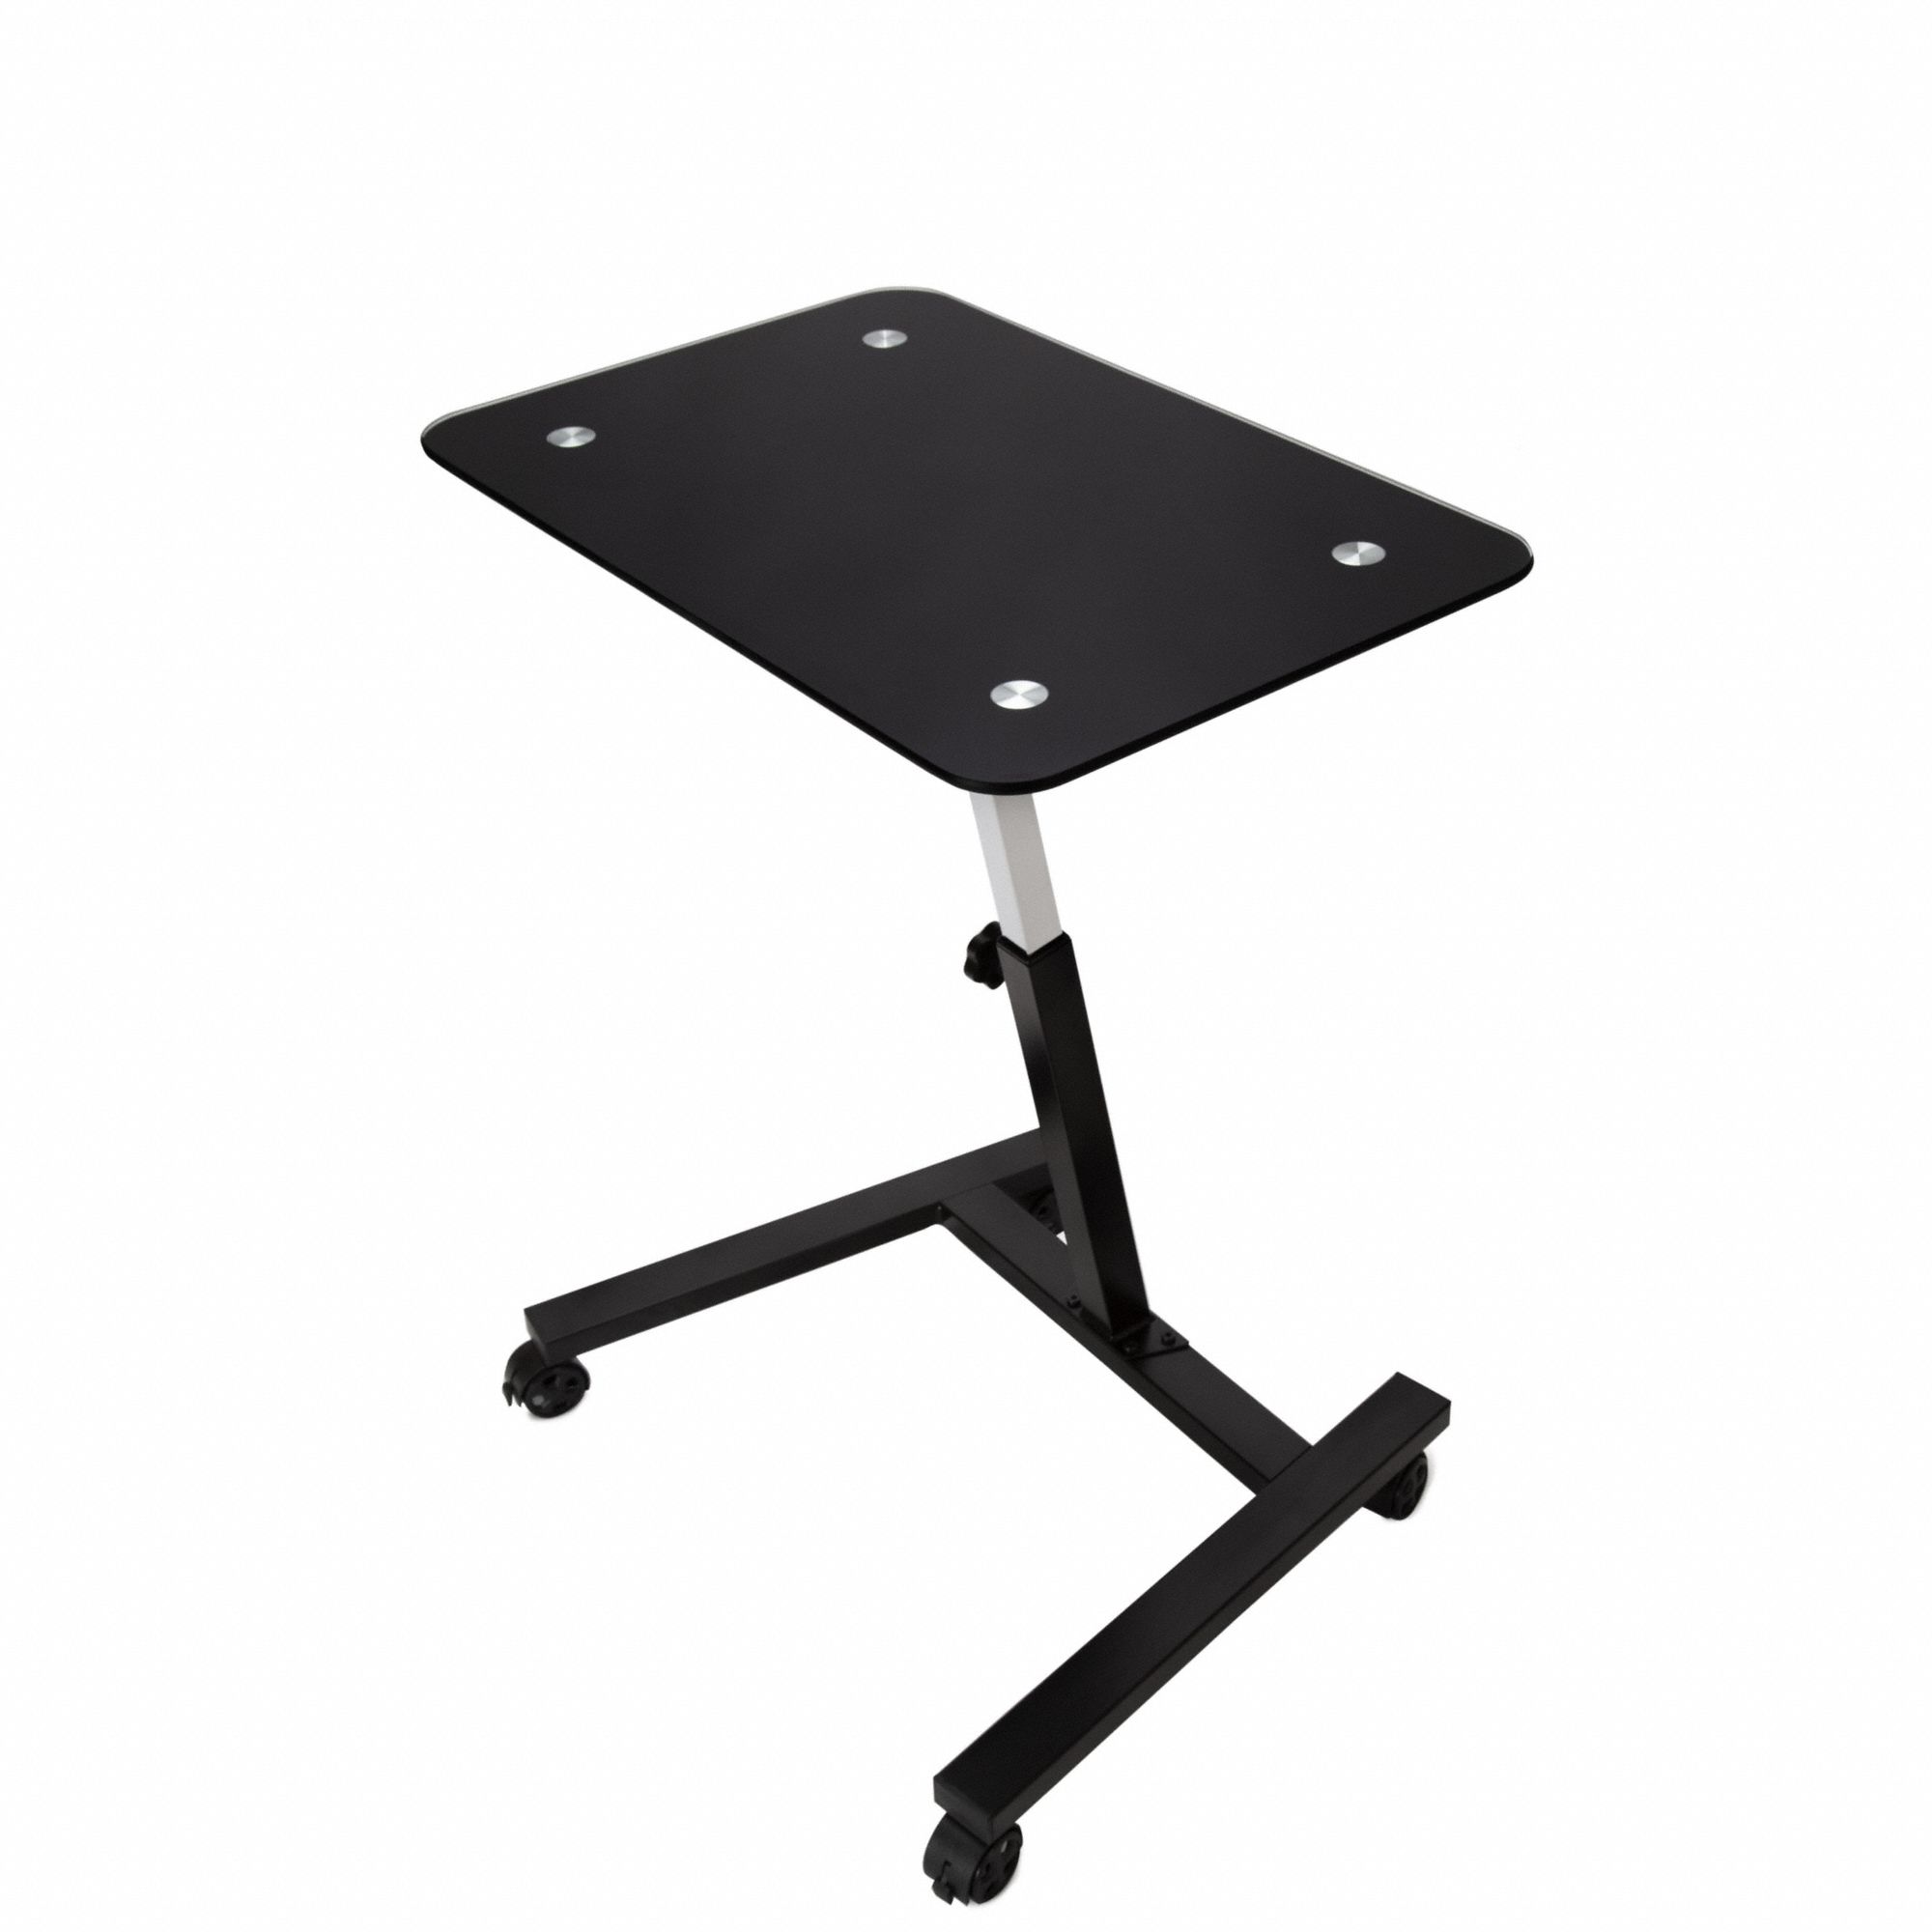 Laptop Cart: 23 5/8 in Overall Wd, 20.47 to 33.07 in., 15 3/4 in Overall Dp, Black Top